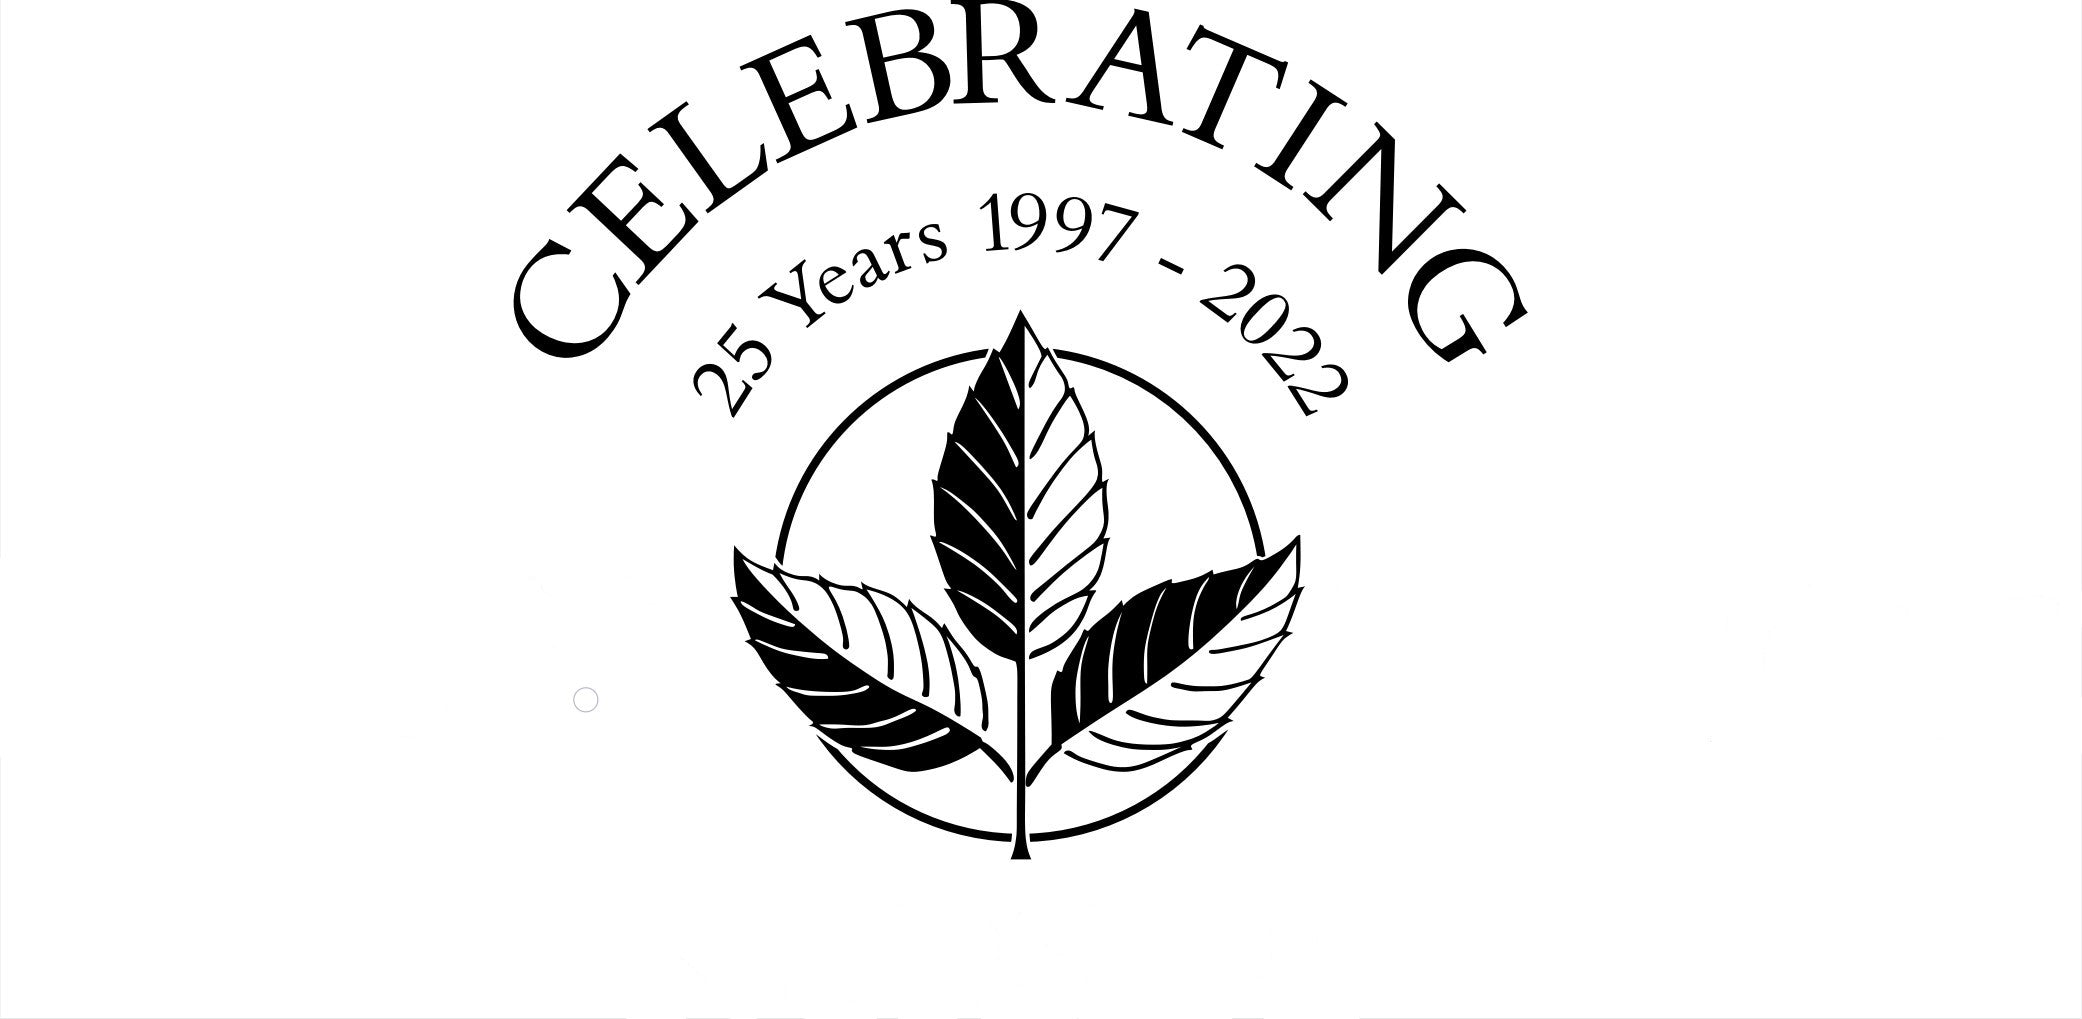 celebrating 25 years in business 2022